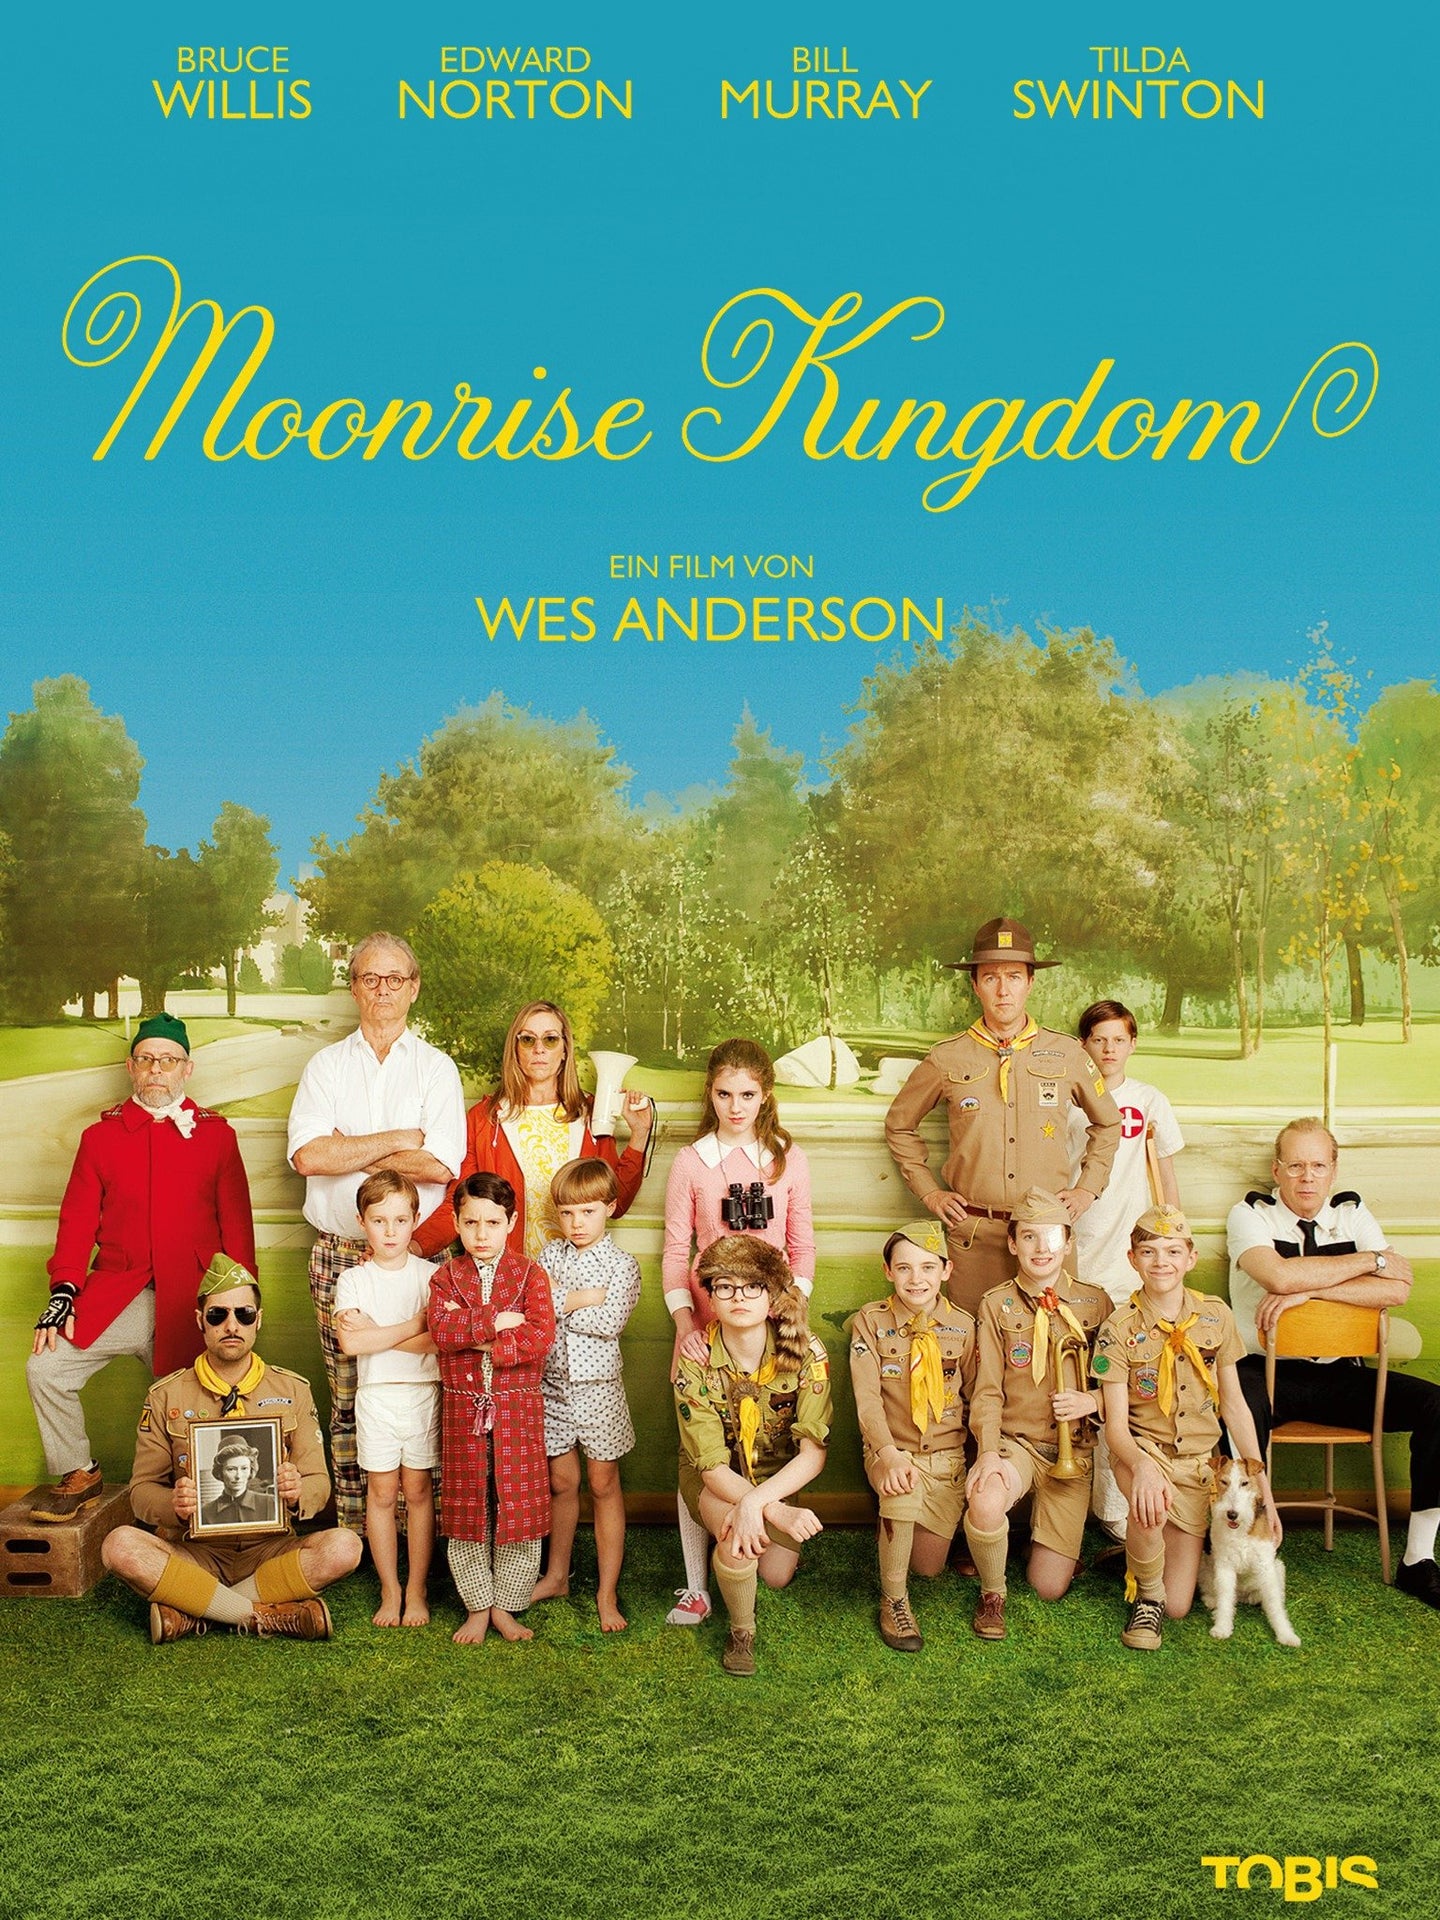 Moonrise Kingdom (2012) Vudu or Movies Anywhere HD redemption only